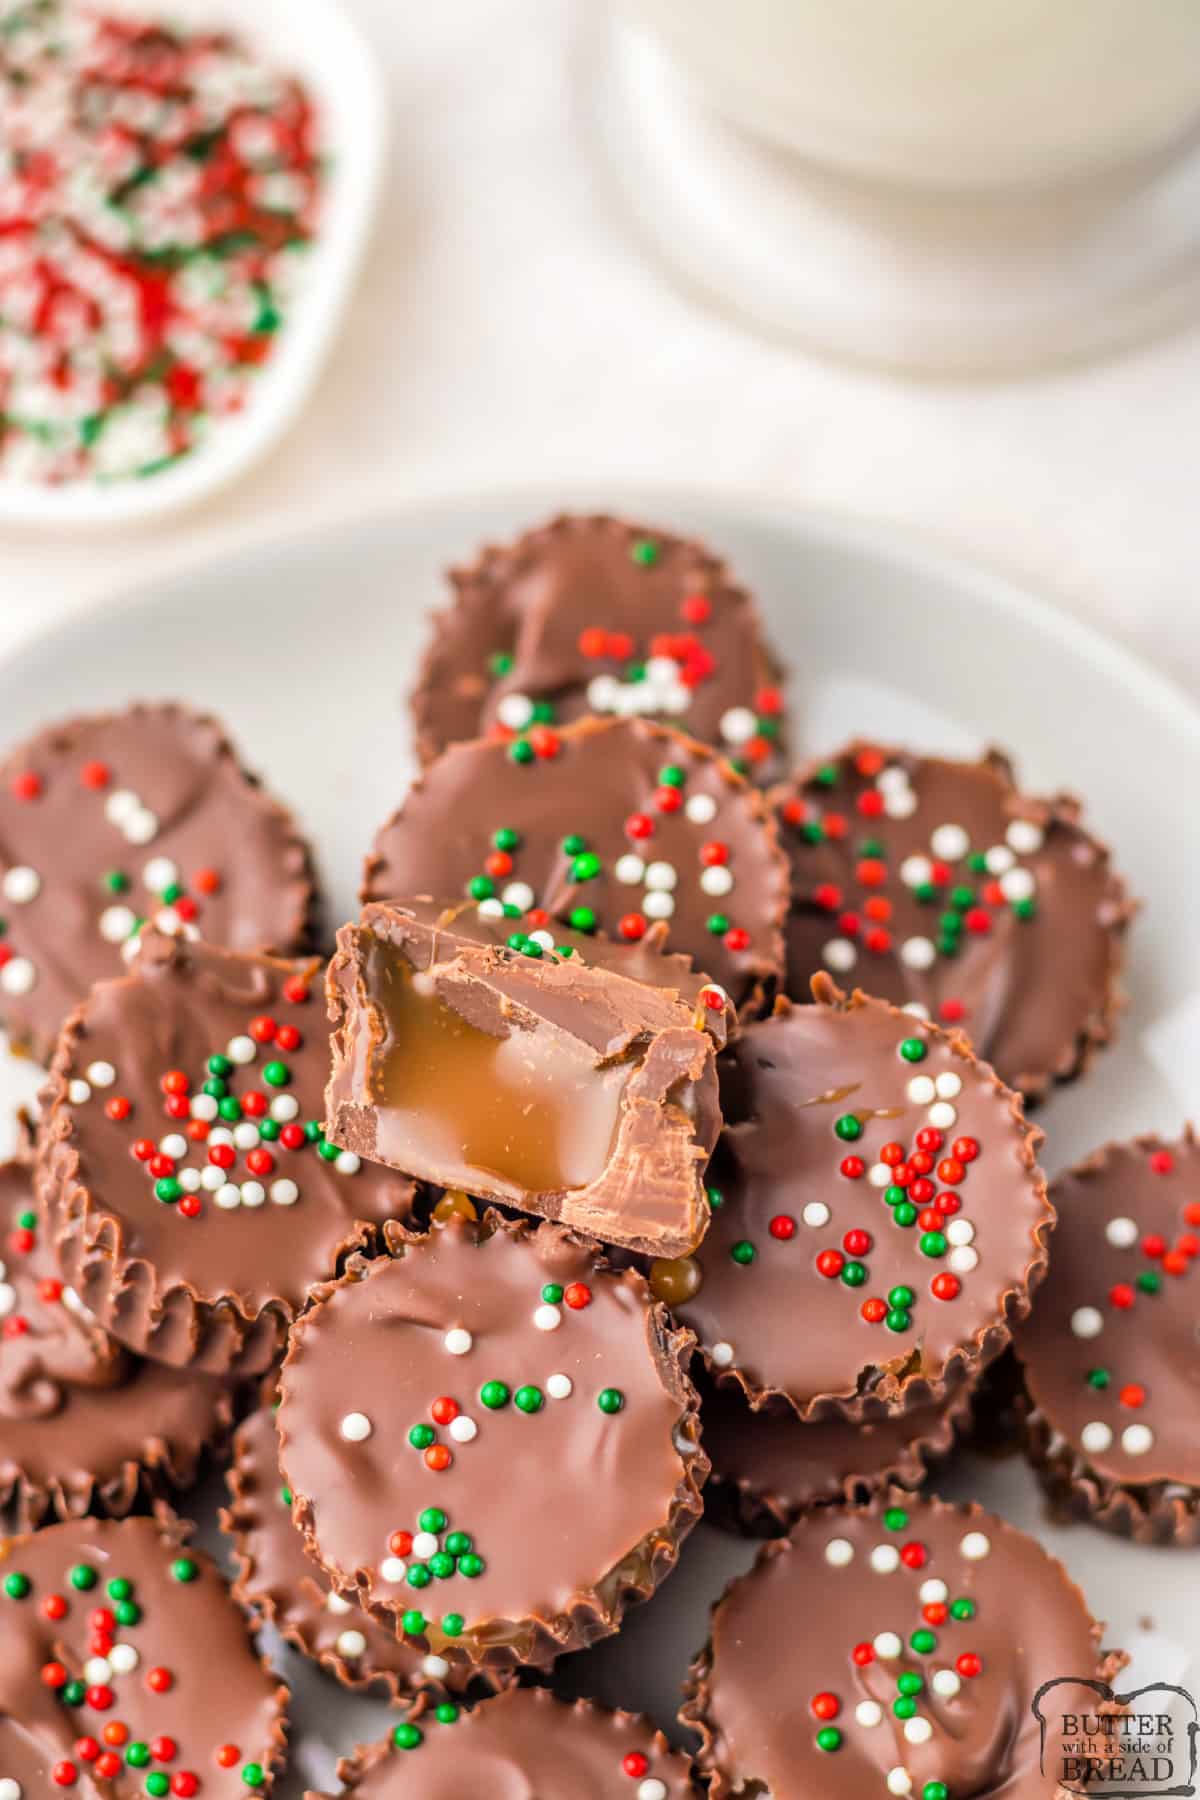 Christmas Chocolate Caramel Cups are the perfect gift or holiday treat for the season. Only 4 ingredients needed to make this easy candy recipe.